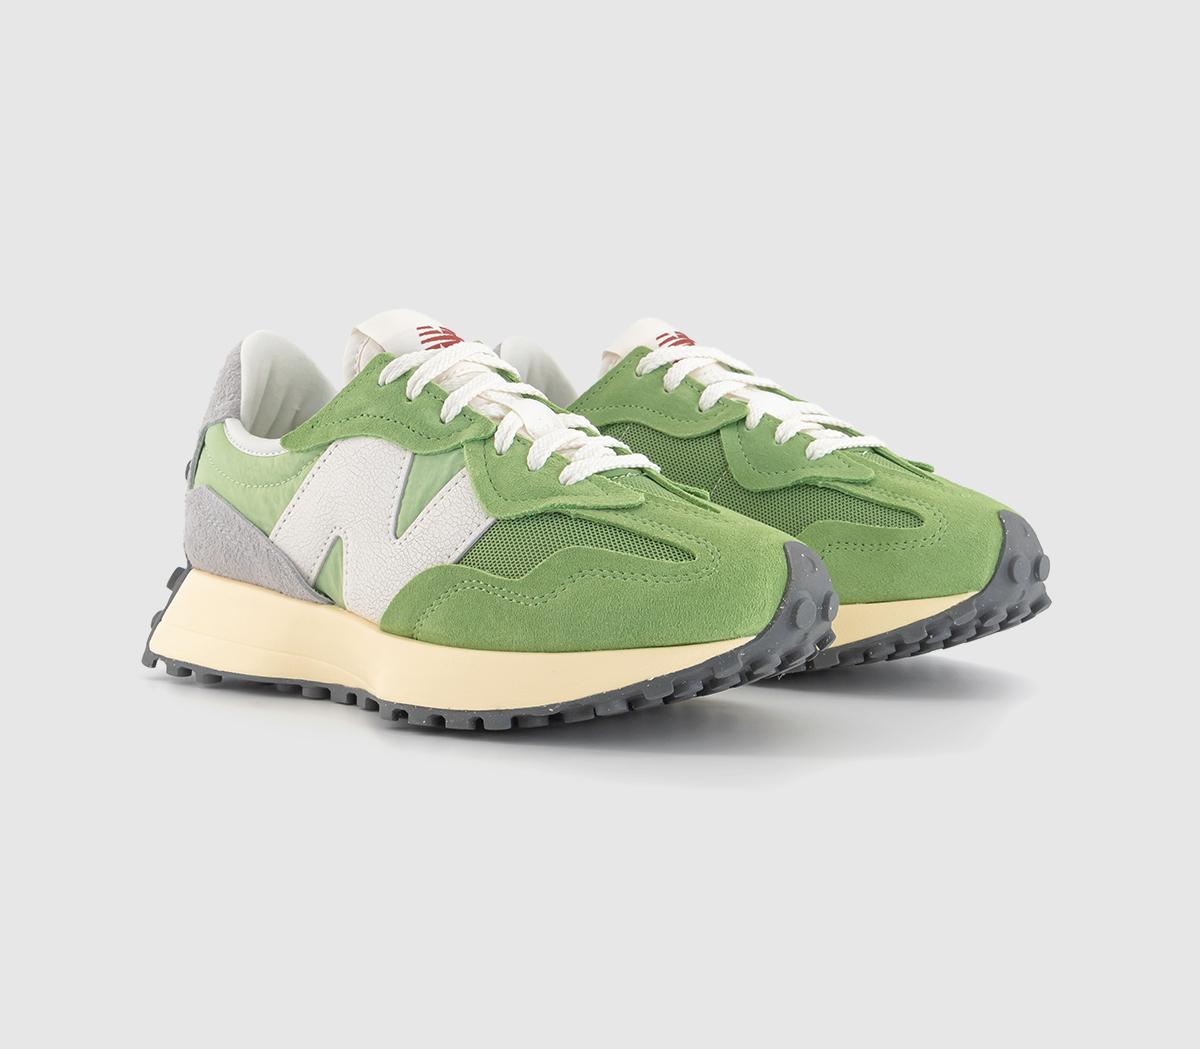 New Balance Mens 327 Trainers Chive Green/White/Grey, 10